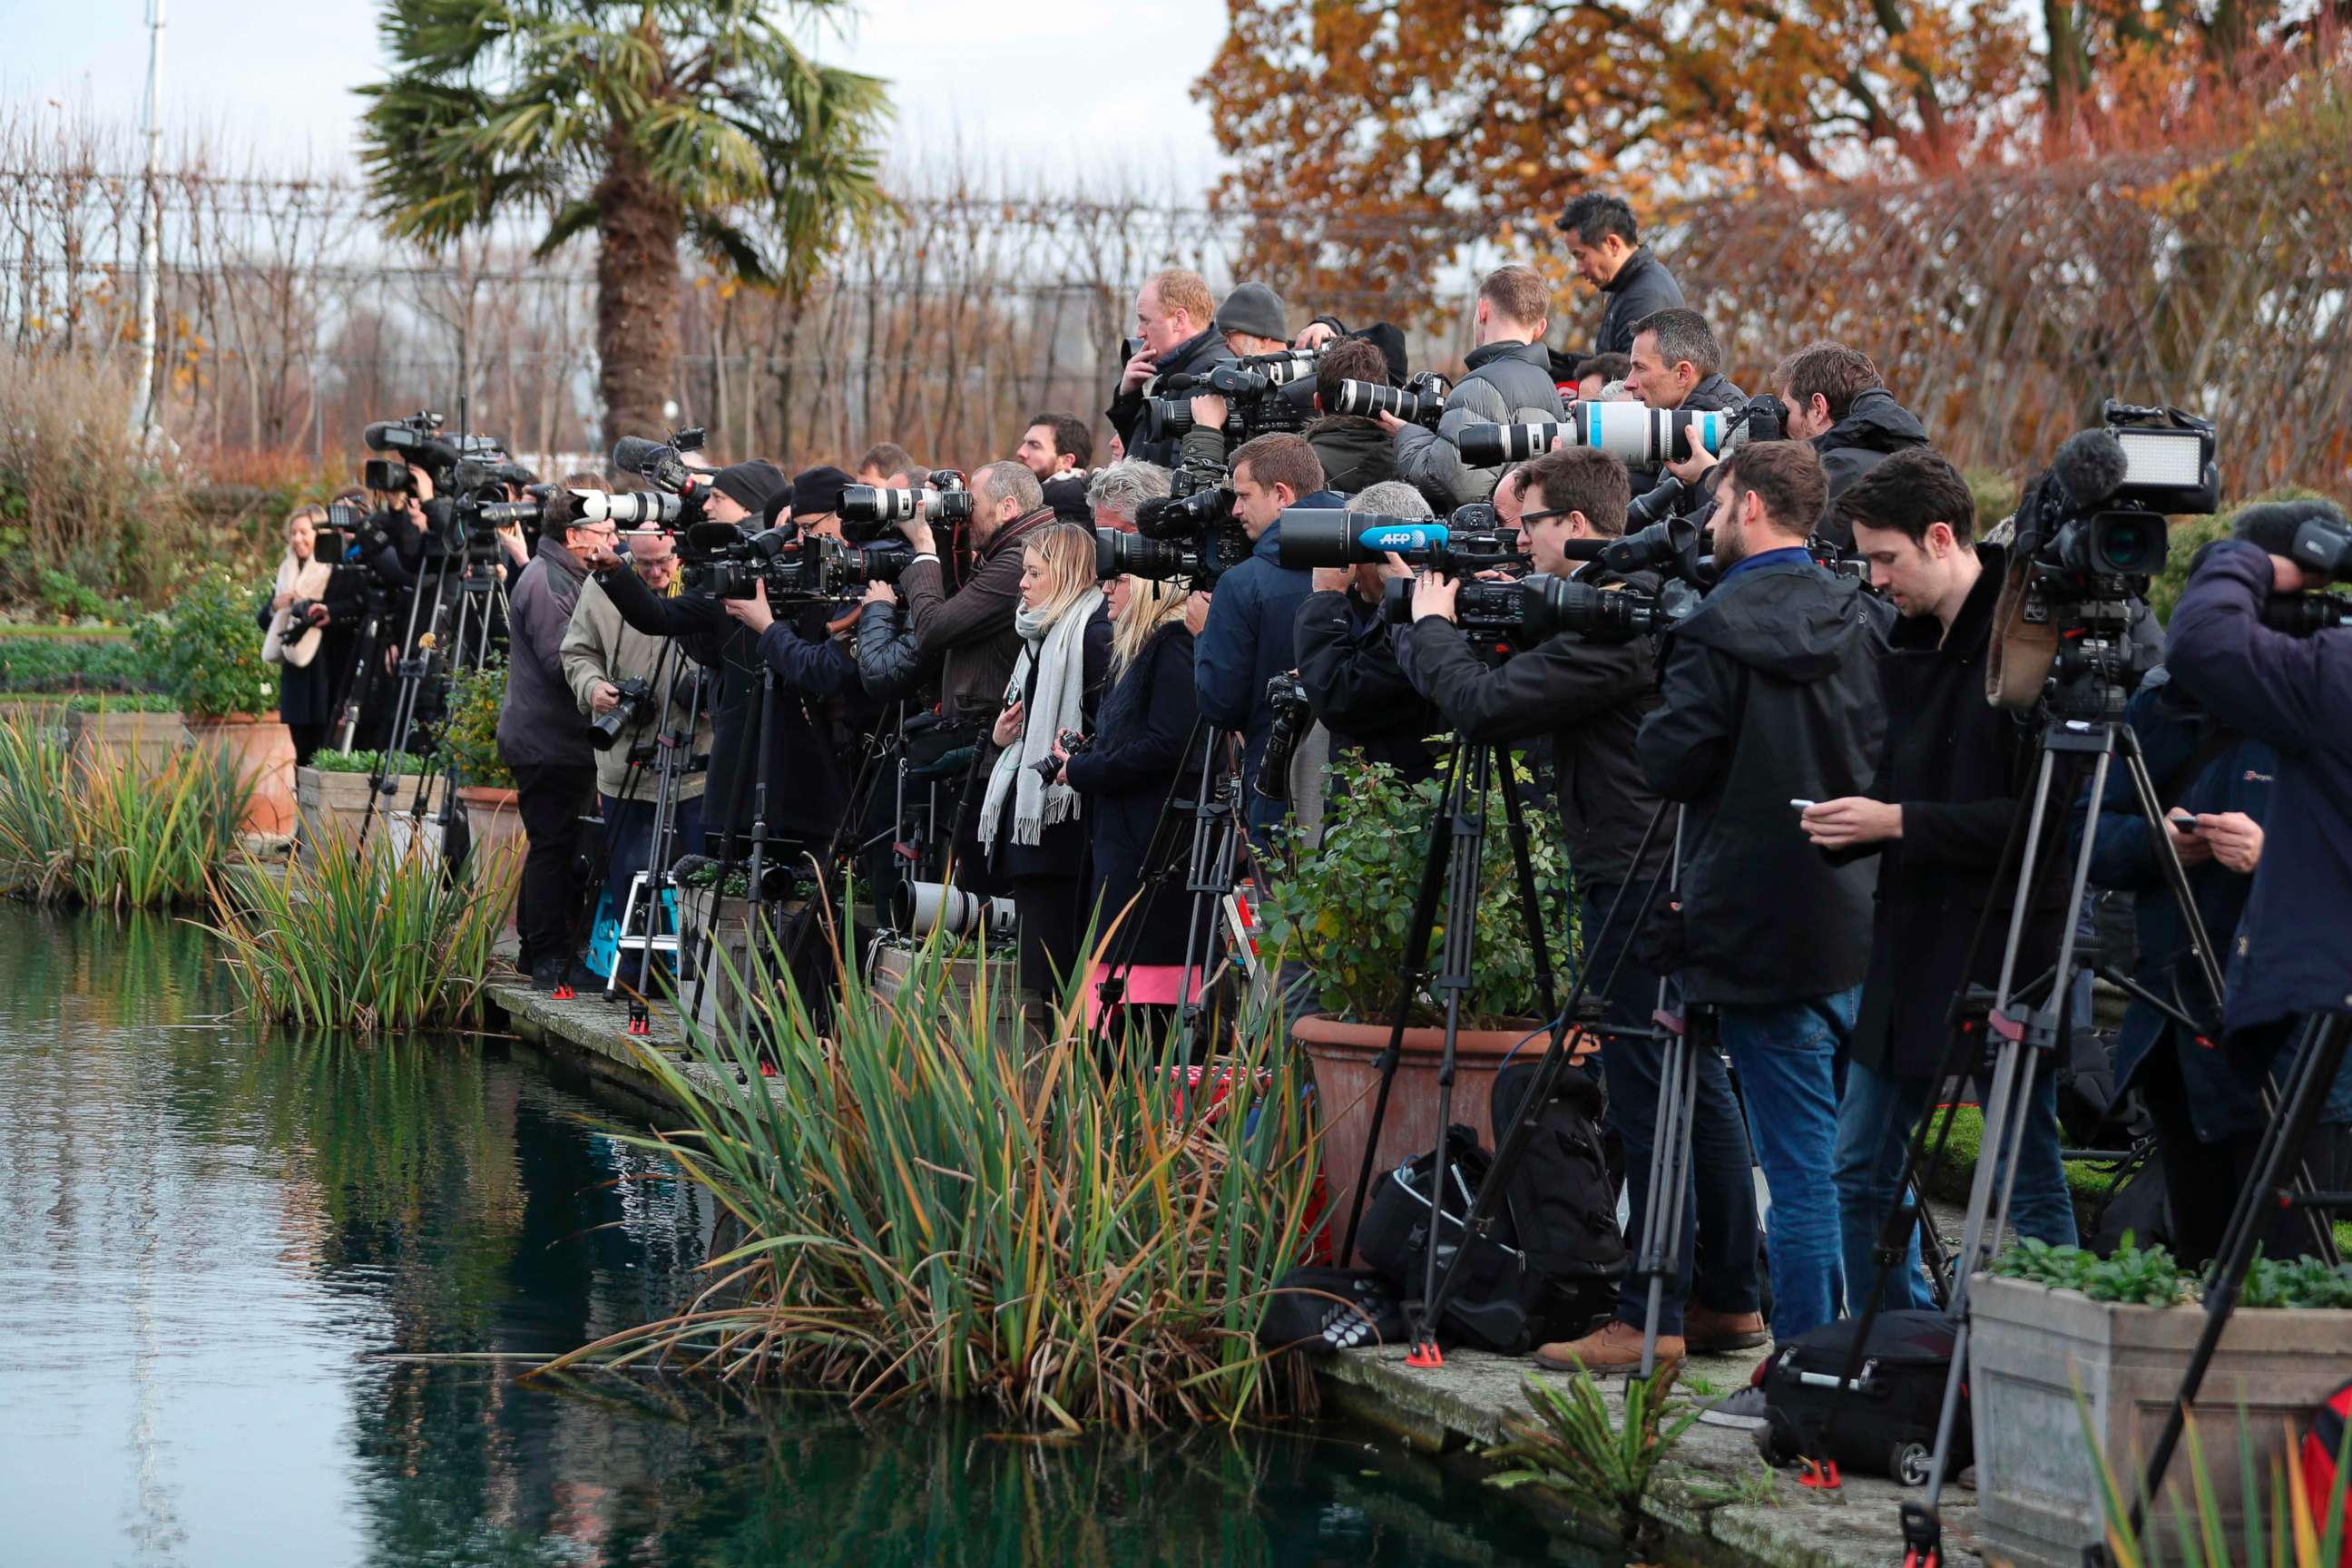 PHOTO: Members of the media gather in the Sunken Garden at Kensington Palace in west London, Nov. 27, 2017, as they wait for Britain's Prince Harry and his fiance, U.S. actress Meghan Markle to pose for a photograph.